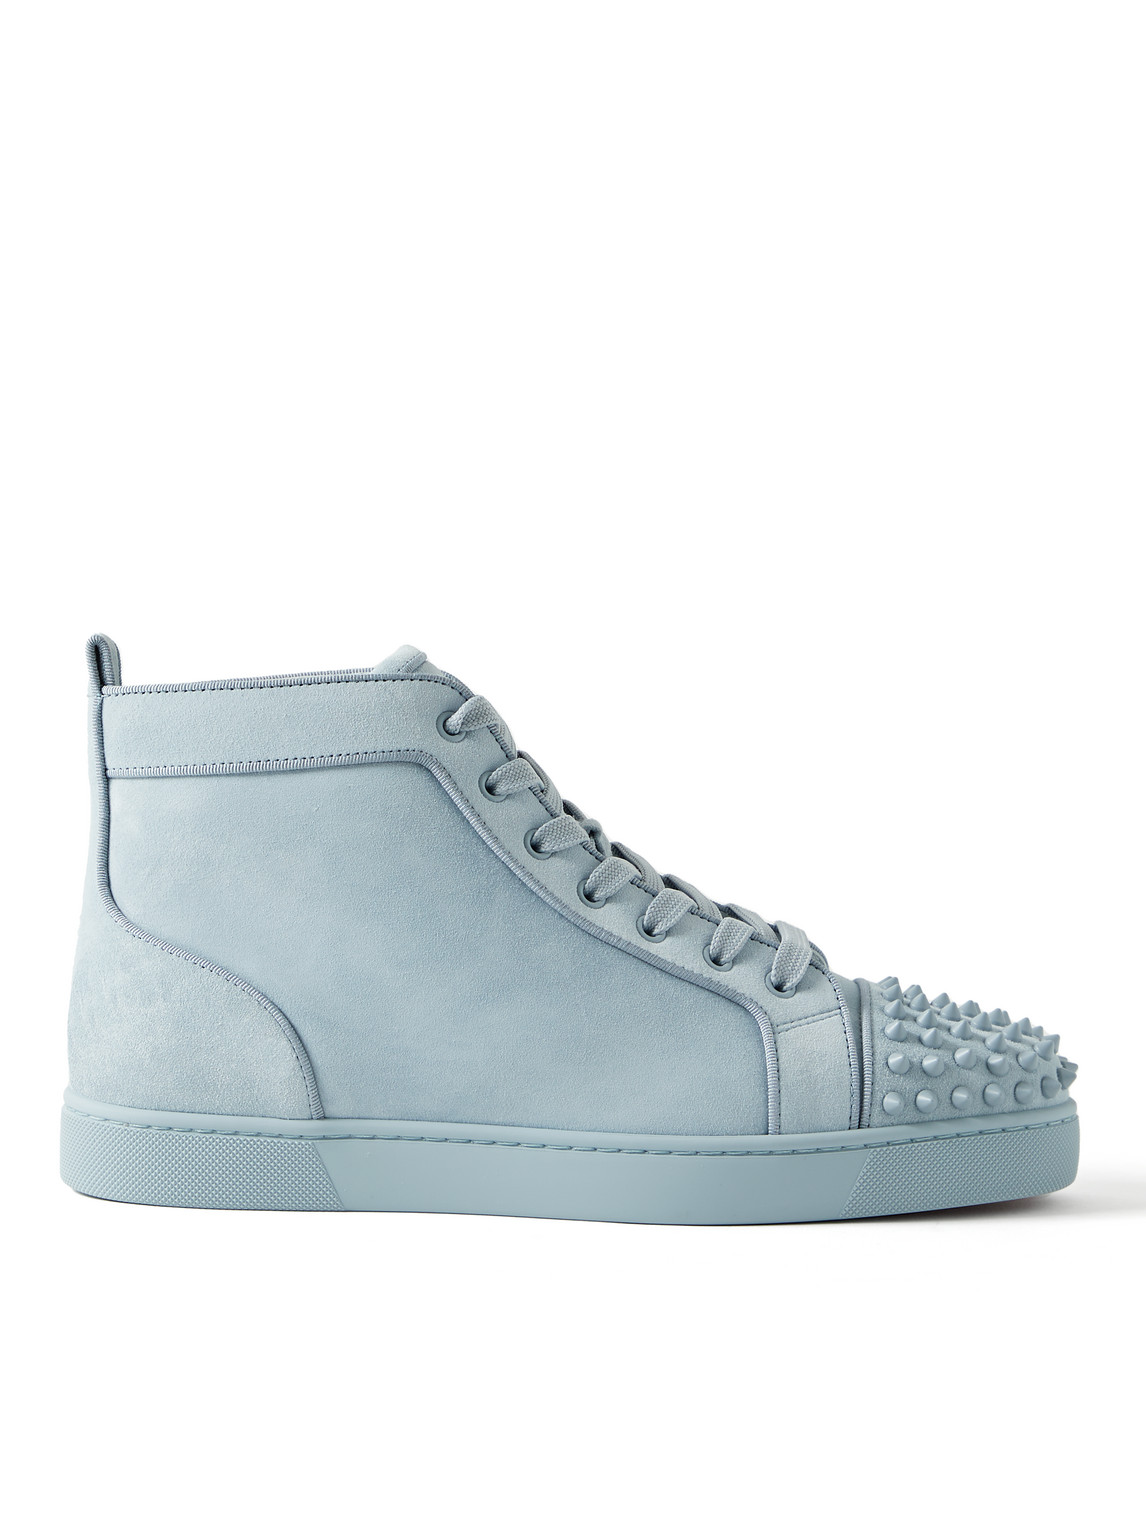 Christian Louboutin Lou Spikes Suede Sneakers In Blue